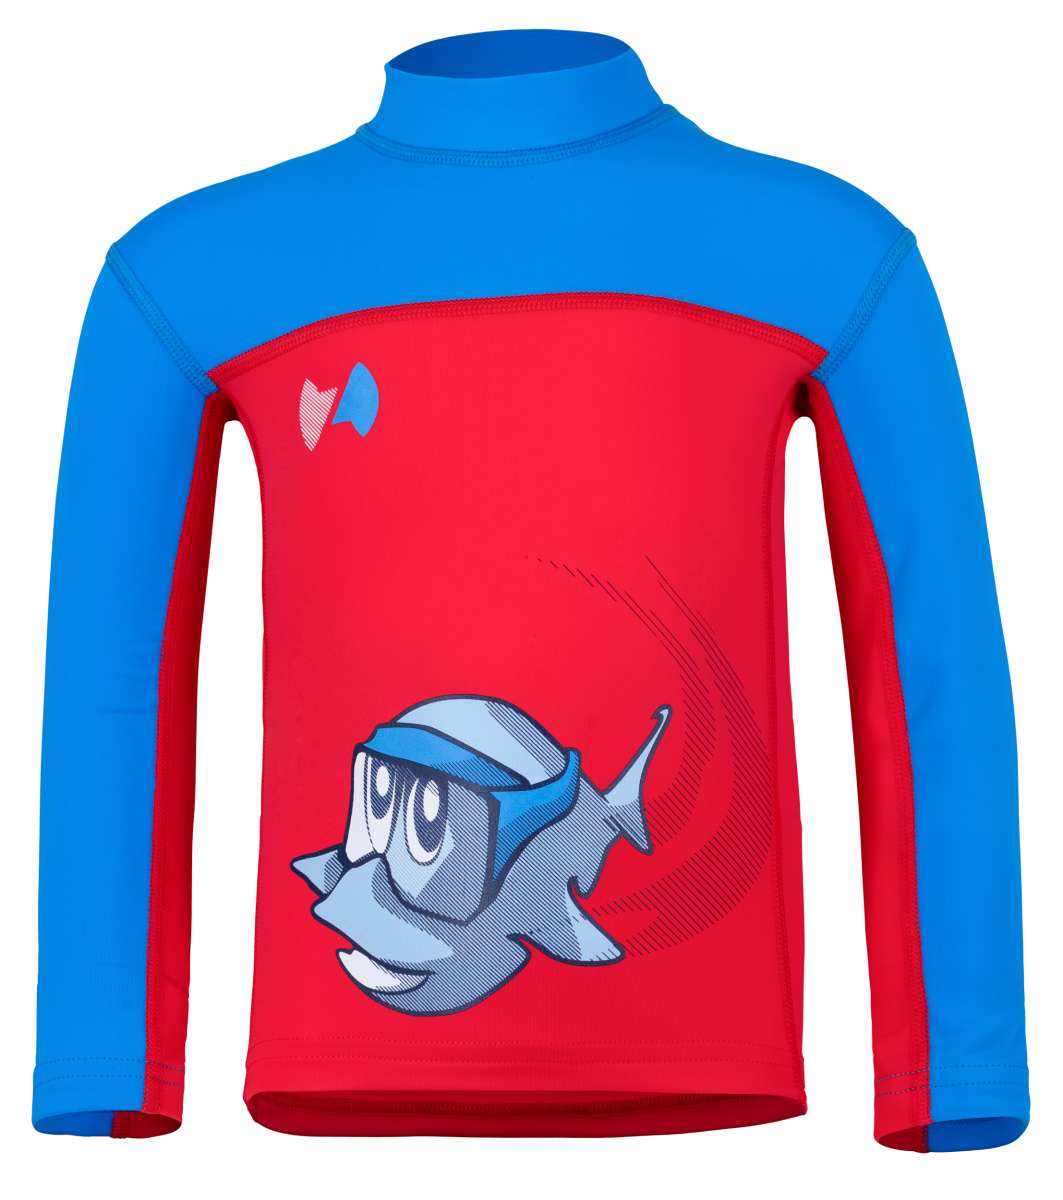 Long sleeve shirt ’swoopie licot / cielo‘ front view 